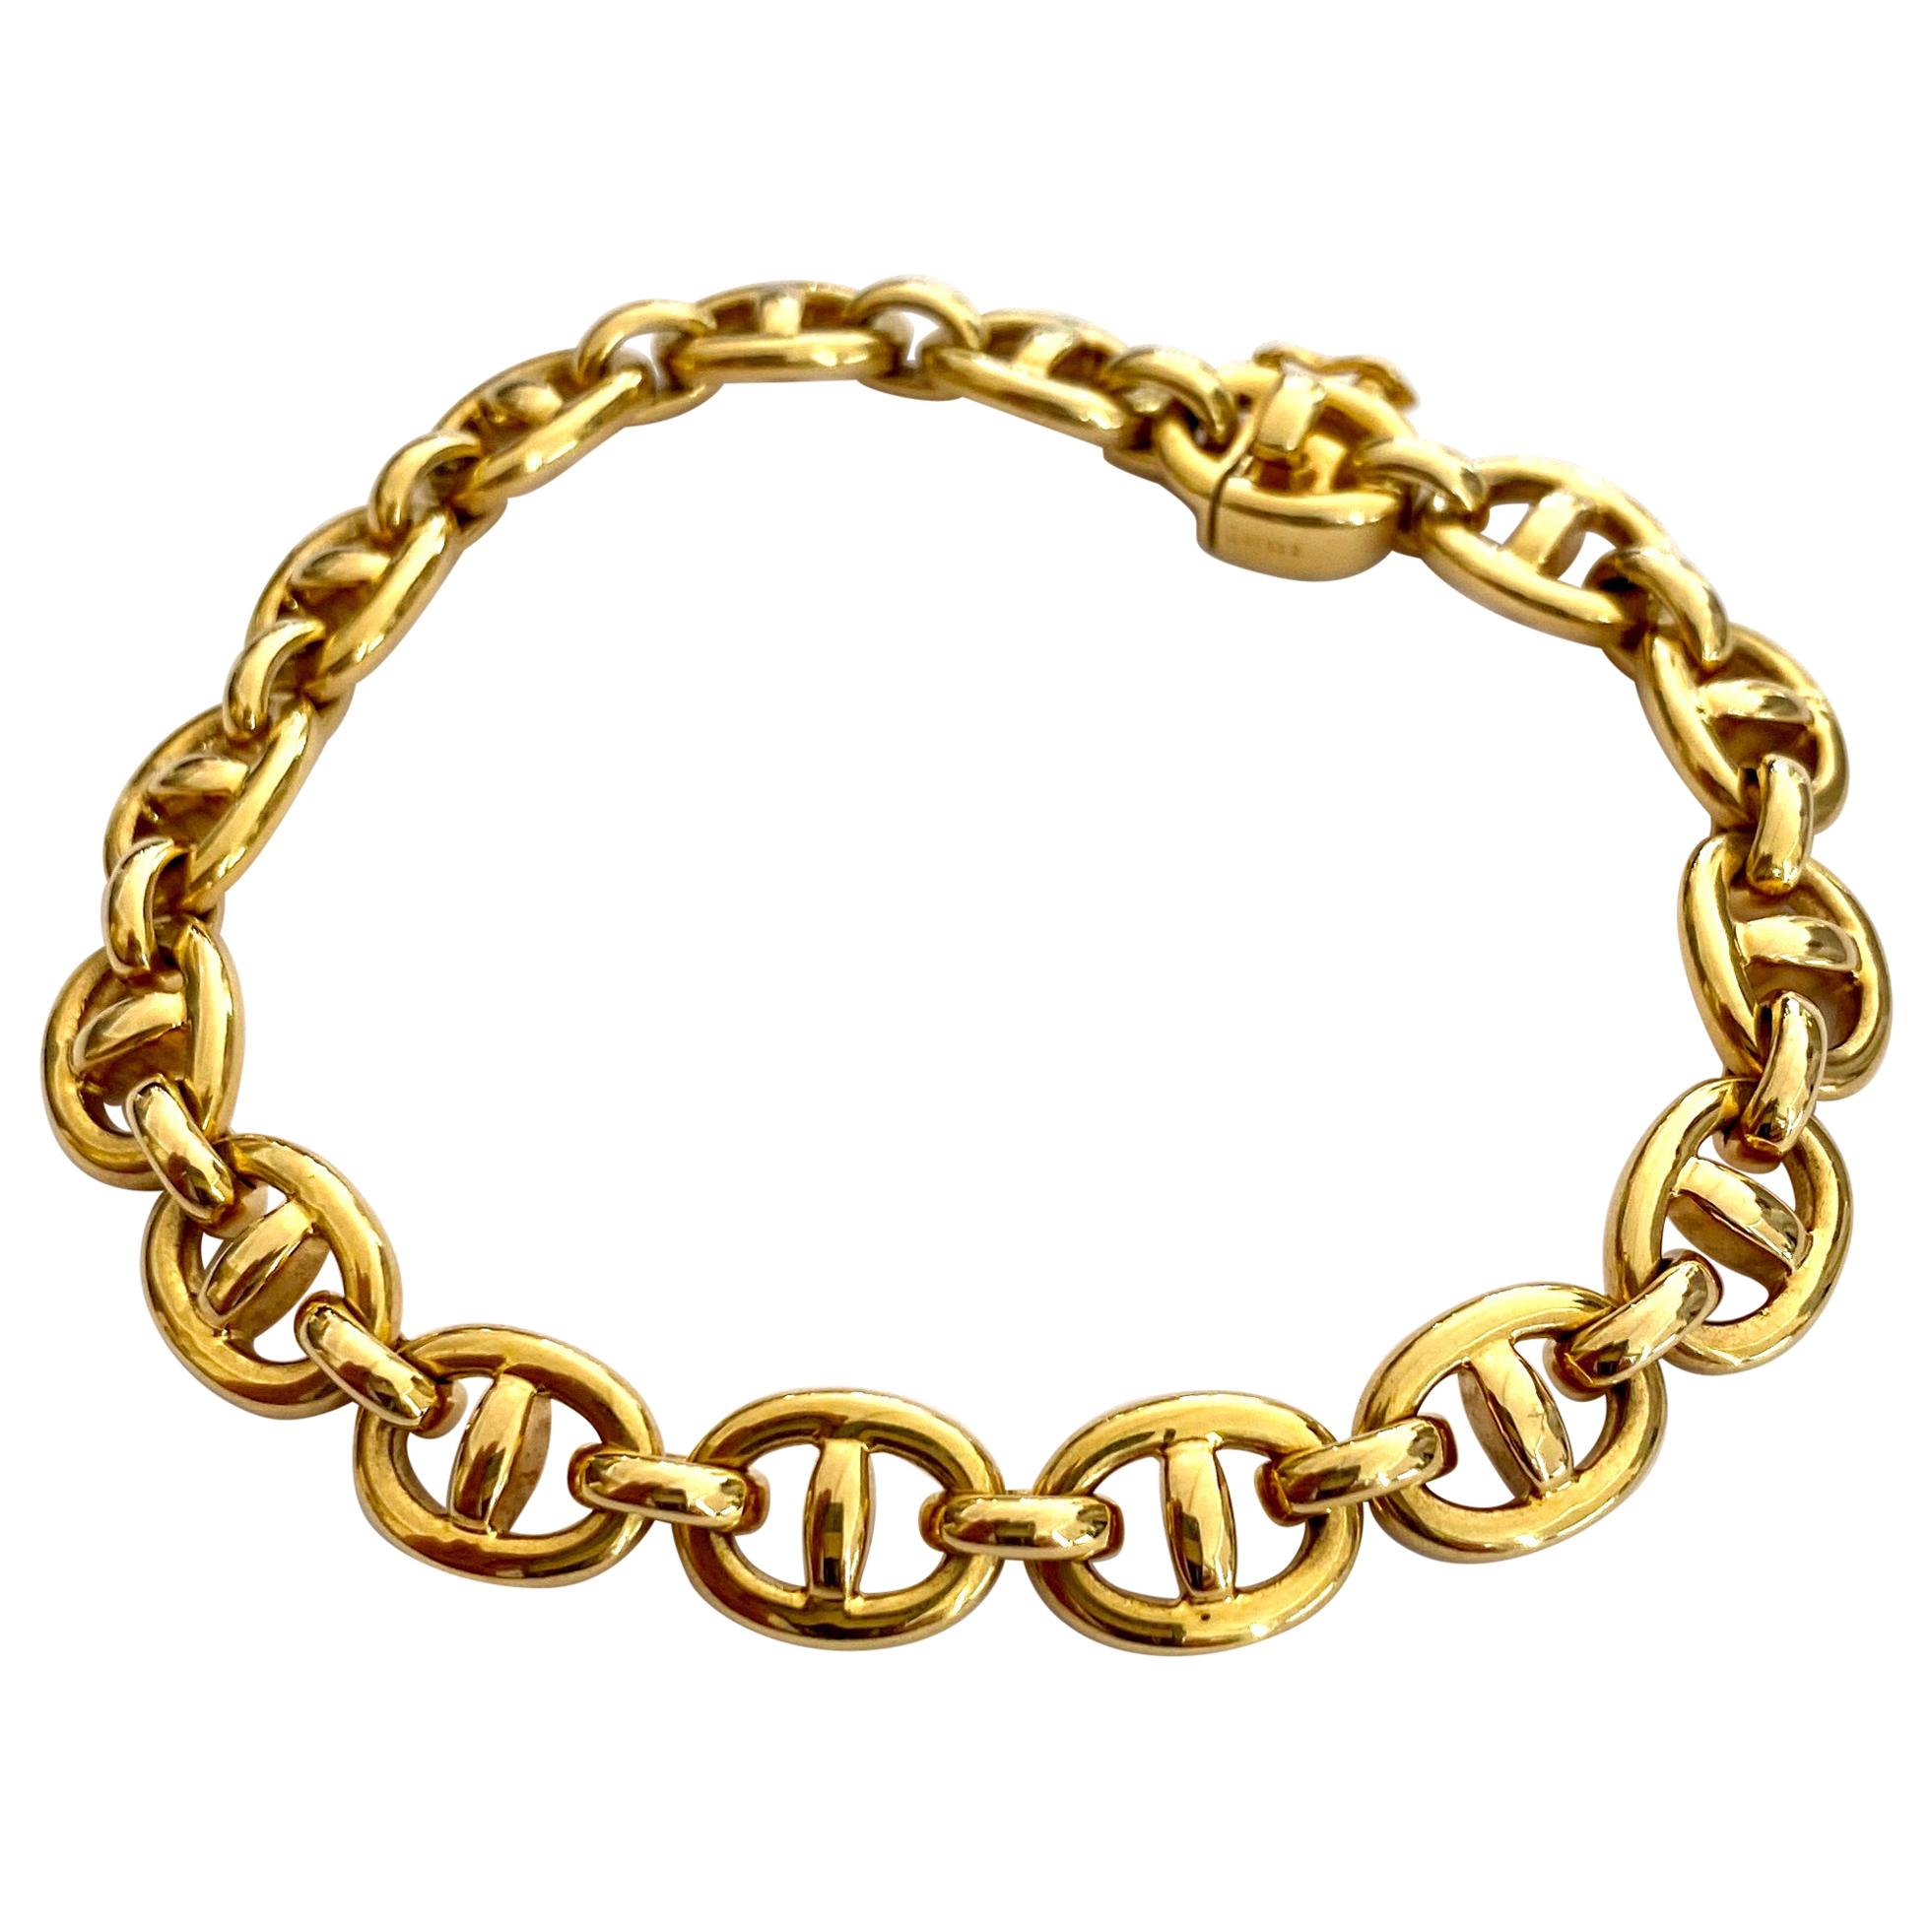 Cartier Yellow Gold Link Bracelet, Solid, Signed "CARTIER", 1995